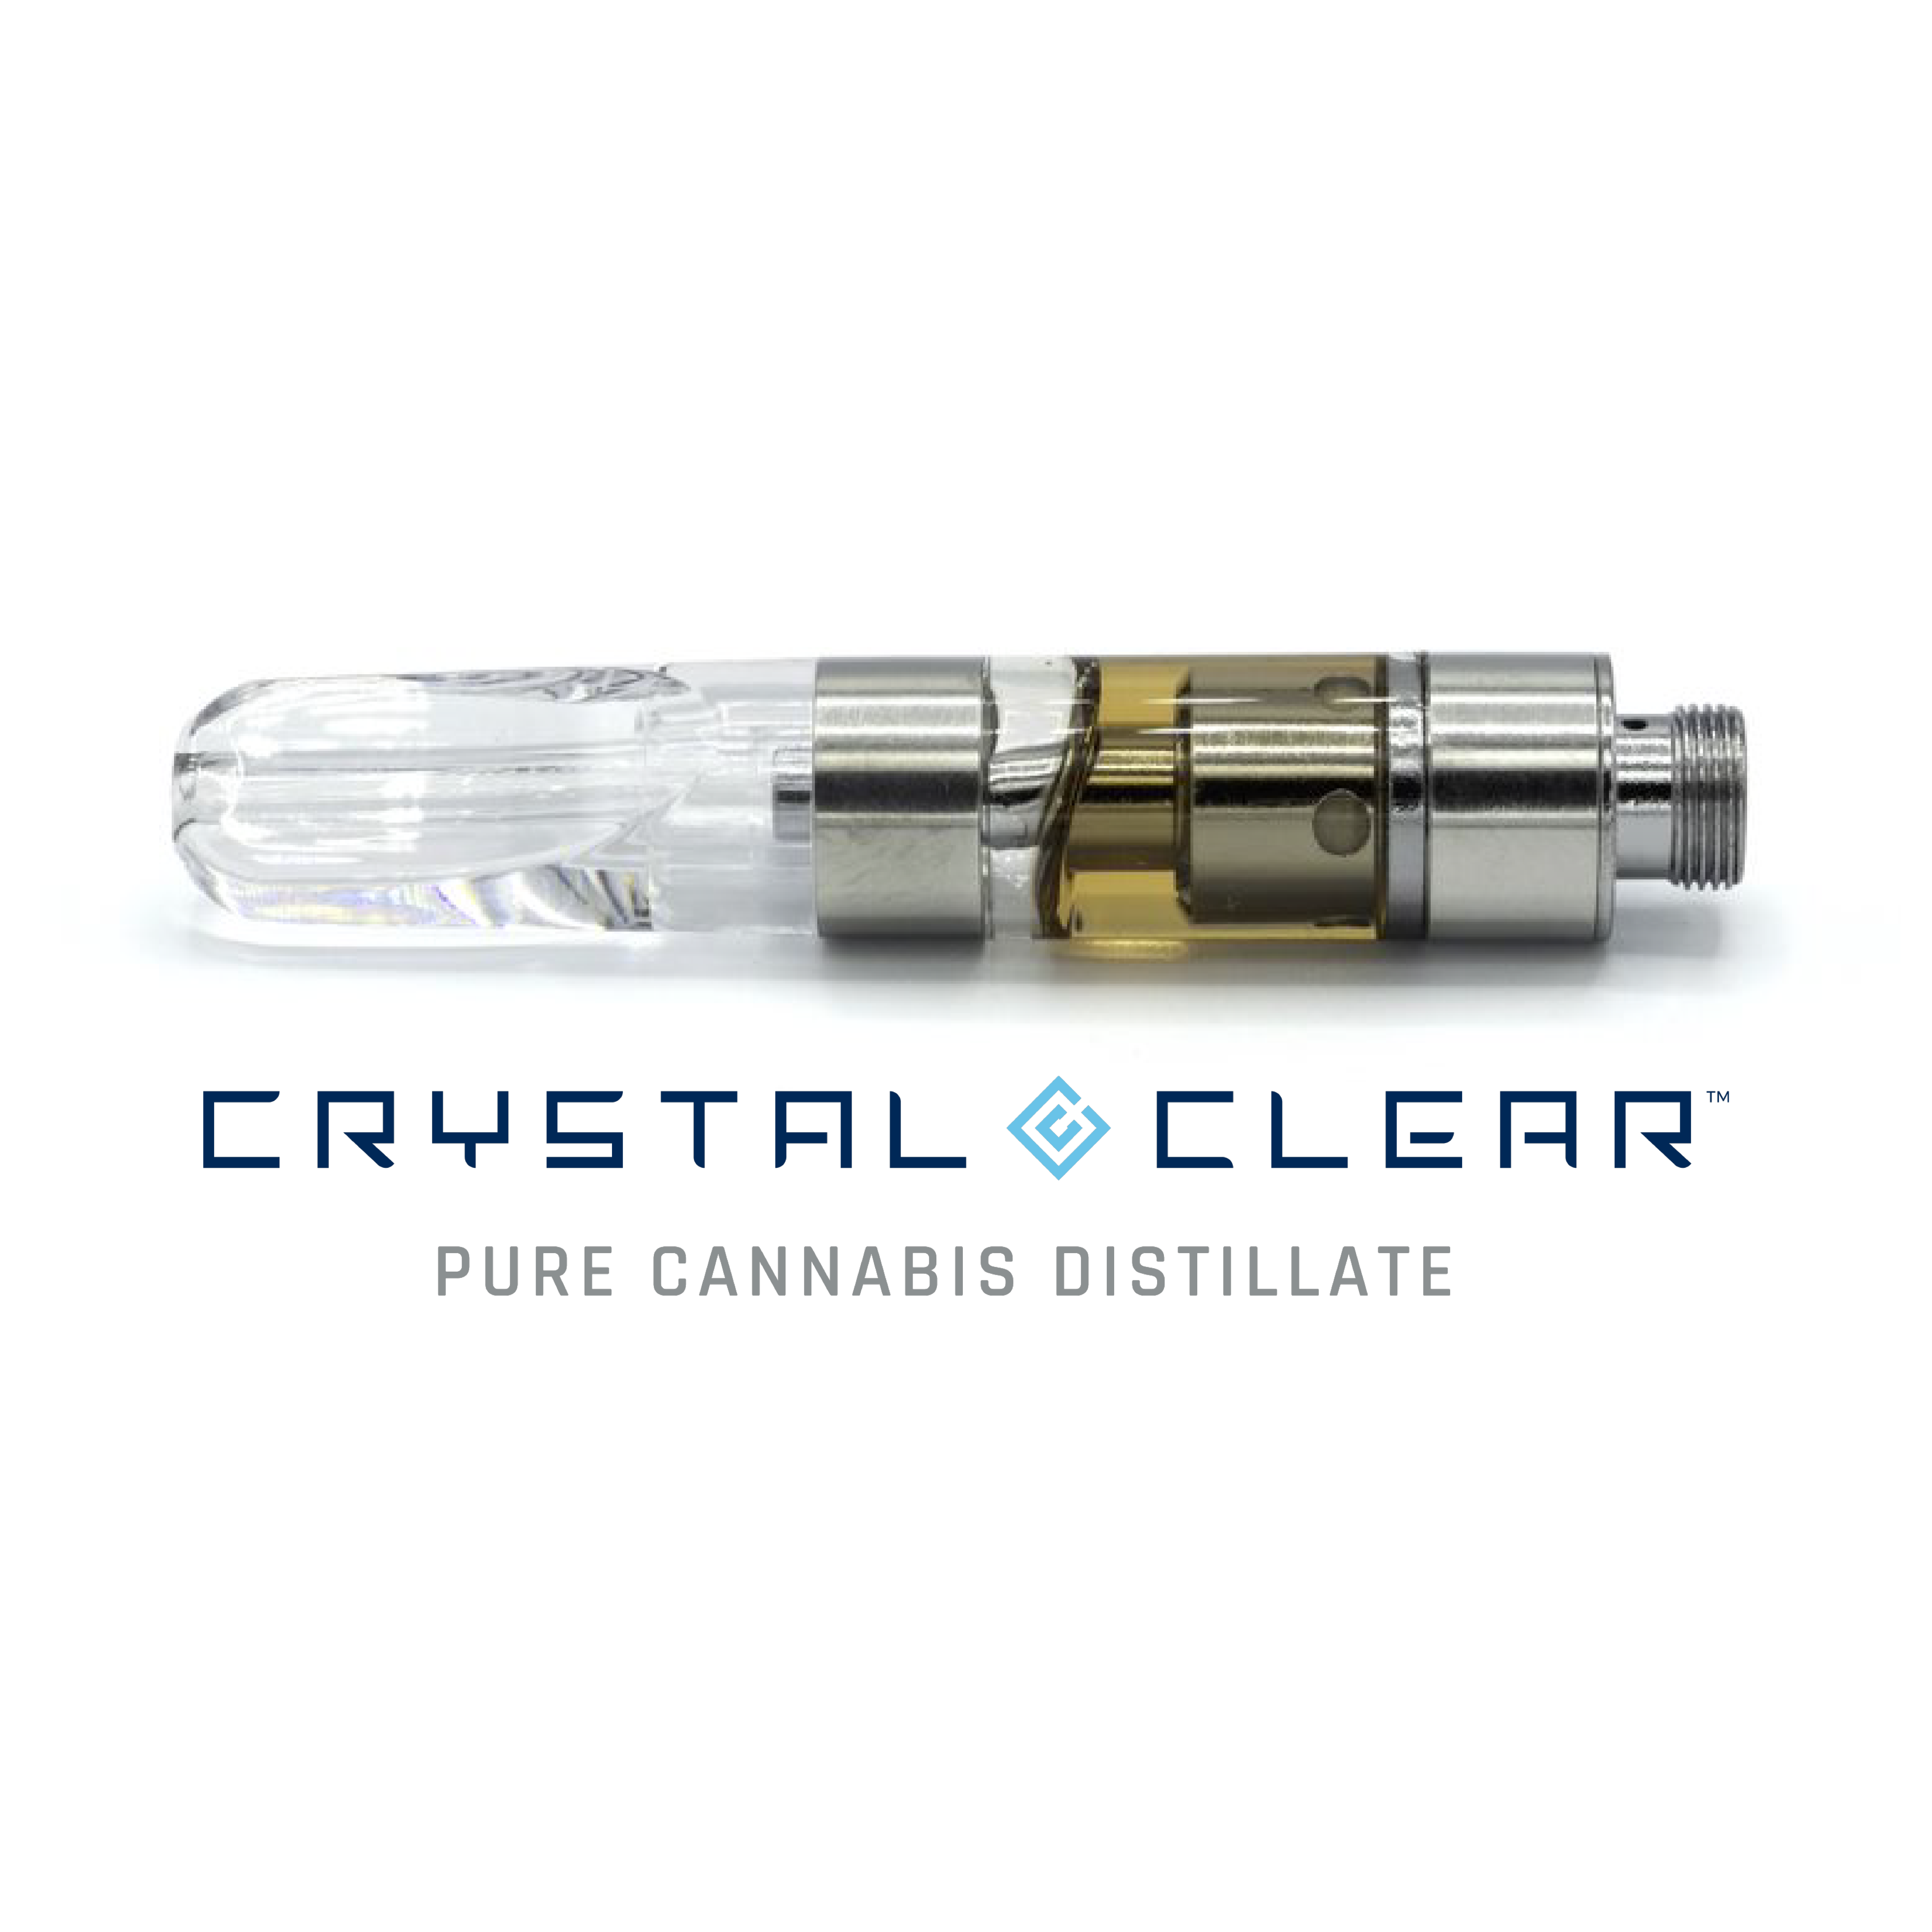 https://leafly-public.s3-us-west-2.amazonaws.com/products/photos/1sdImbowStSzQFvNWc4t_Crystal_Clear_Leafly_Cartridge.png